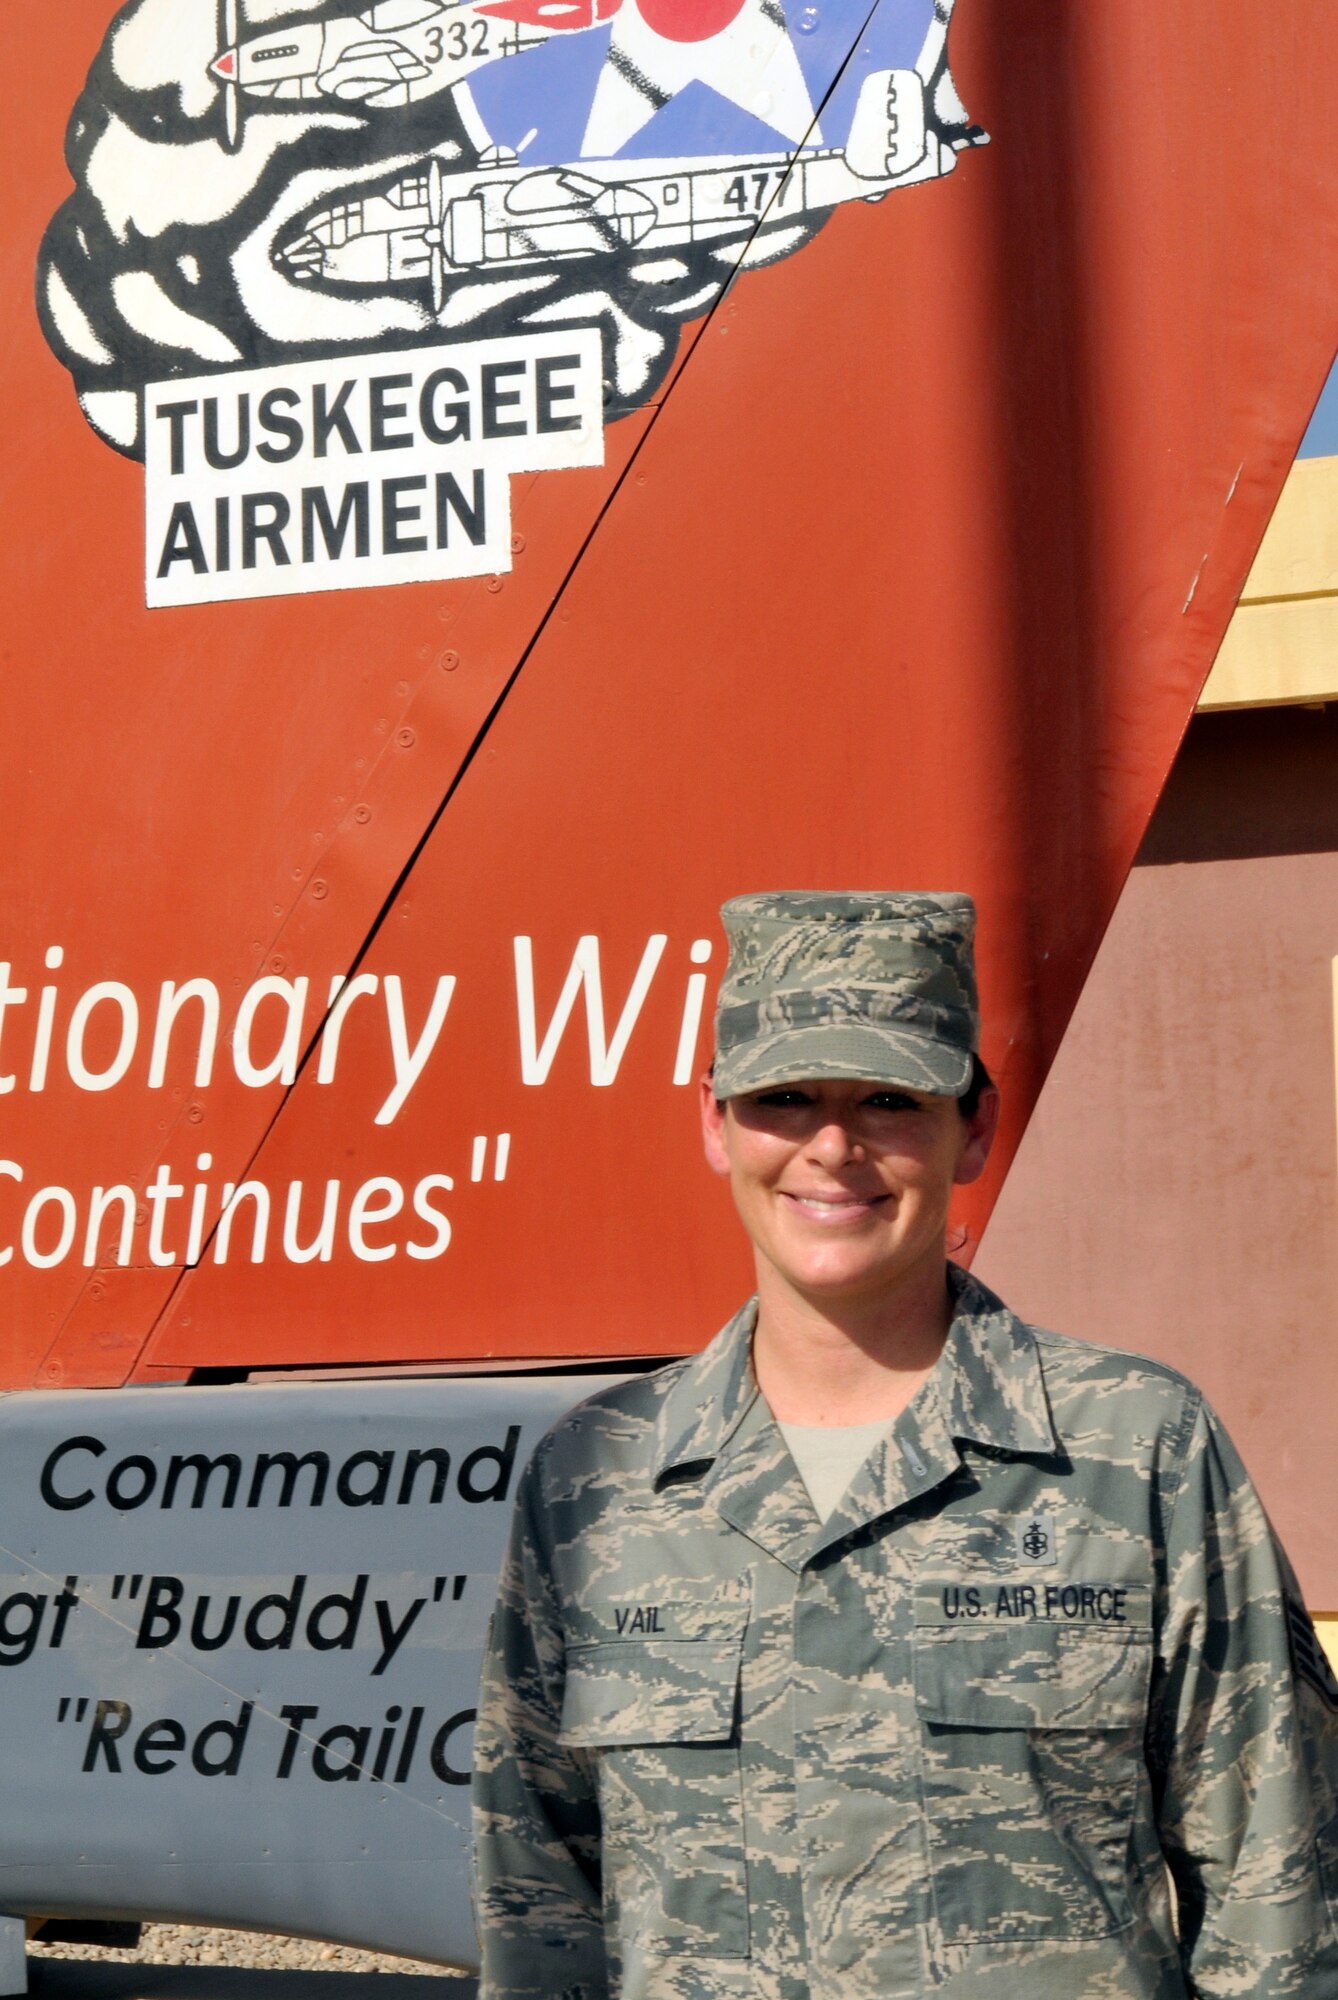 Staff Sgt. Andrea Vail, 332nd Expeditionary Medical Group Air Force Theater Hospital command and control technician, is the 332nd Air Expeditionary Wing's Tuskegee Airman of the Week for Sept. 4-11, 2010. Sergeant Vail, a native of Goodyear, Az., deployed from the 944th Fighter Wing, Luke Air Force Base, Az., expertly led a 14-member mass casualty retrieval team in off-loading 12 critical patients from the hospital’s helipad to the care they required. In addition, she trained 54 servicemembers in helicopter, ambulance and MRAP litter extractions, creating experienced patient movement technicians when the need arises. (U.S. Air Force photo/Staff Sgt. Phillip Butterfield)